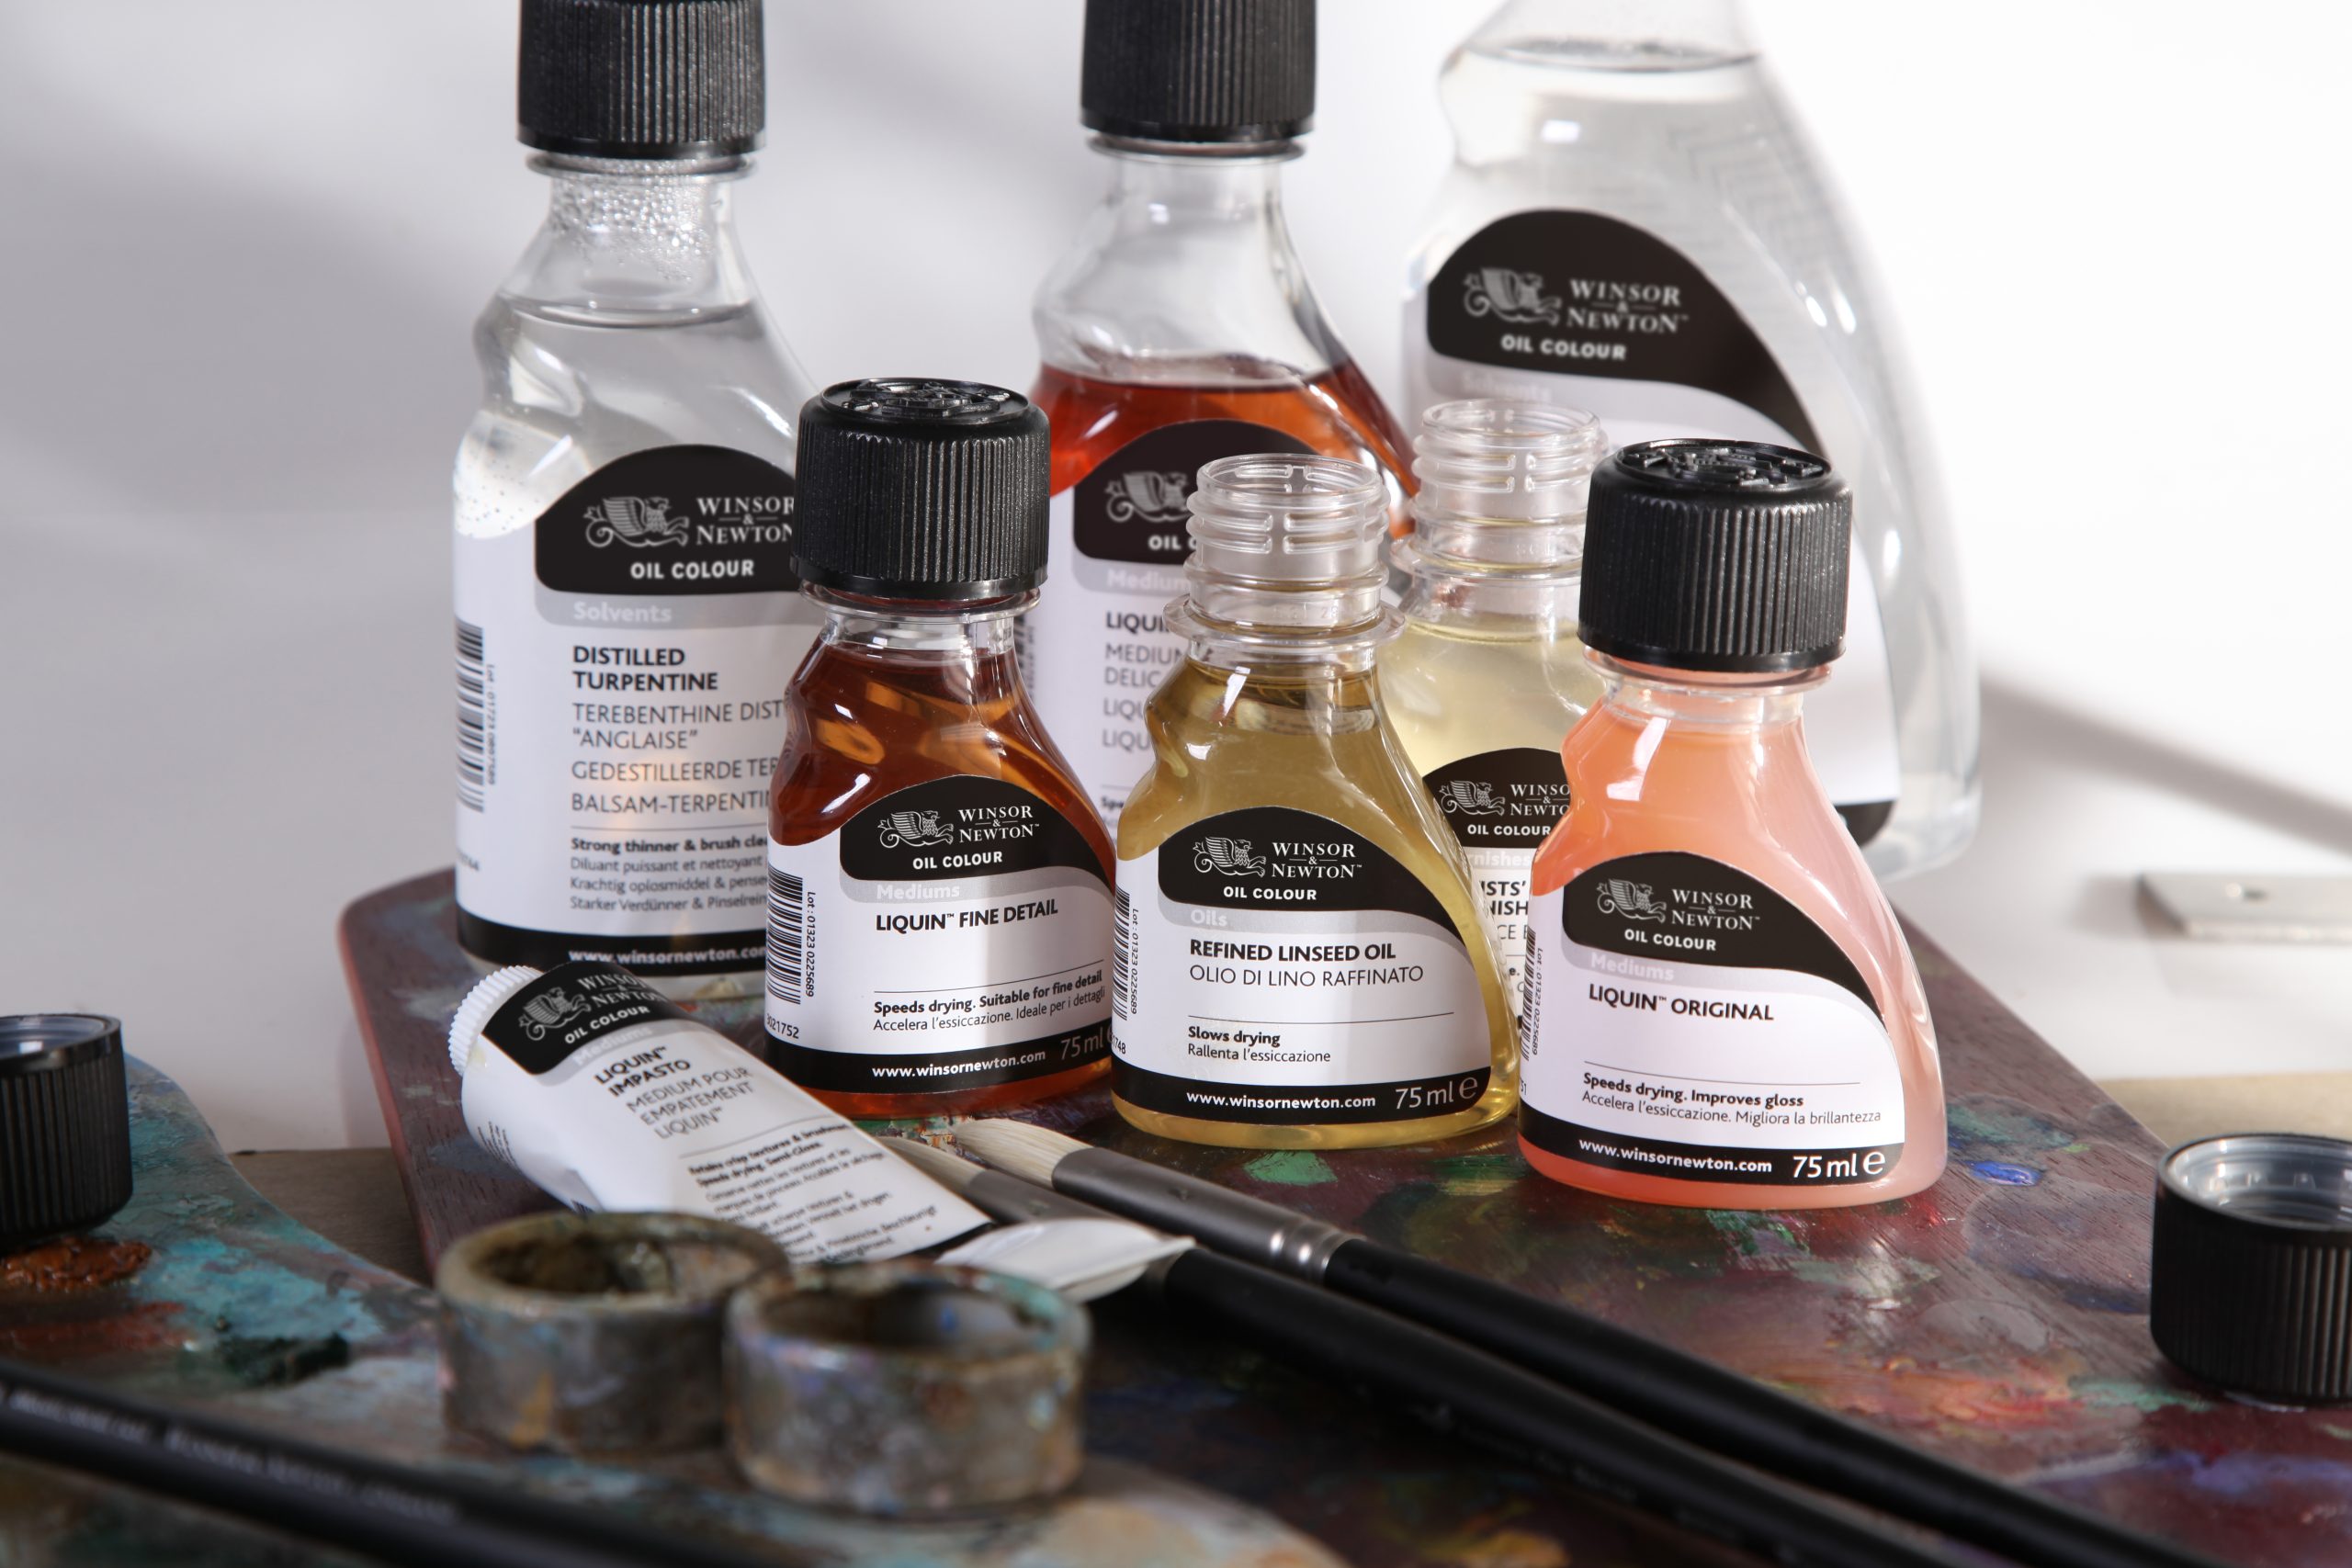 Oil Painting Medic: I'm Confused about Alkyd Mediums for Oil